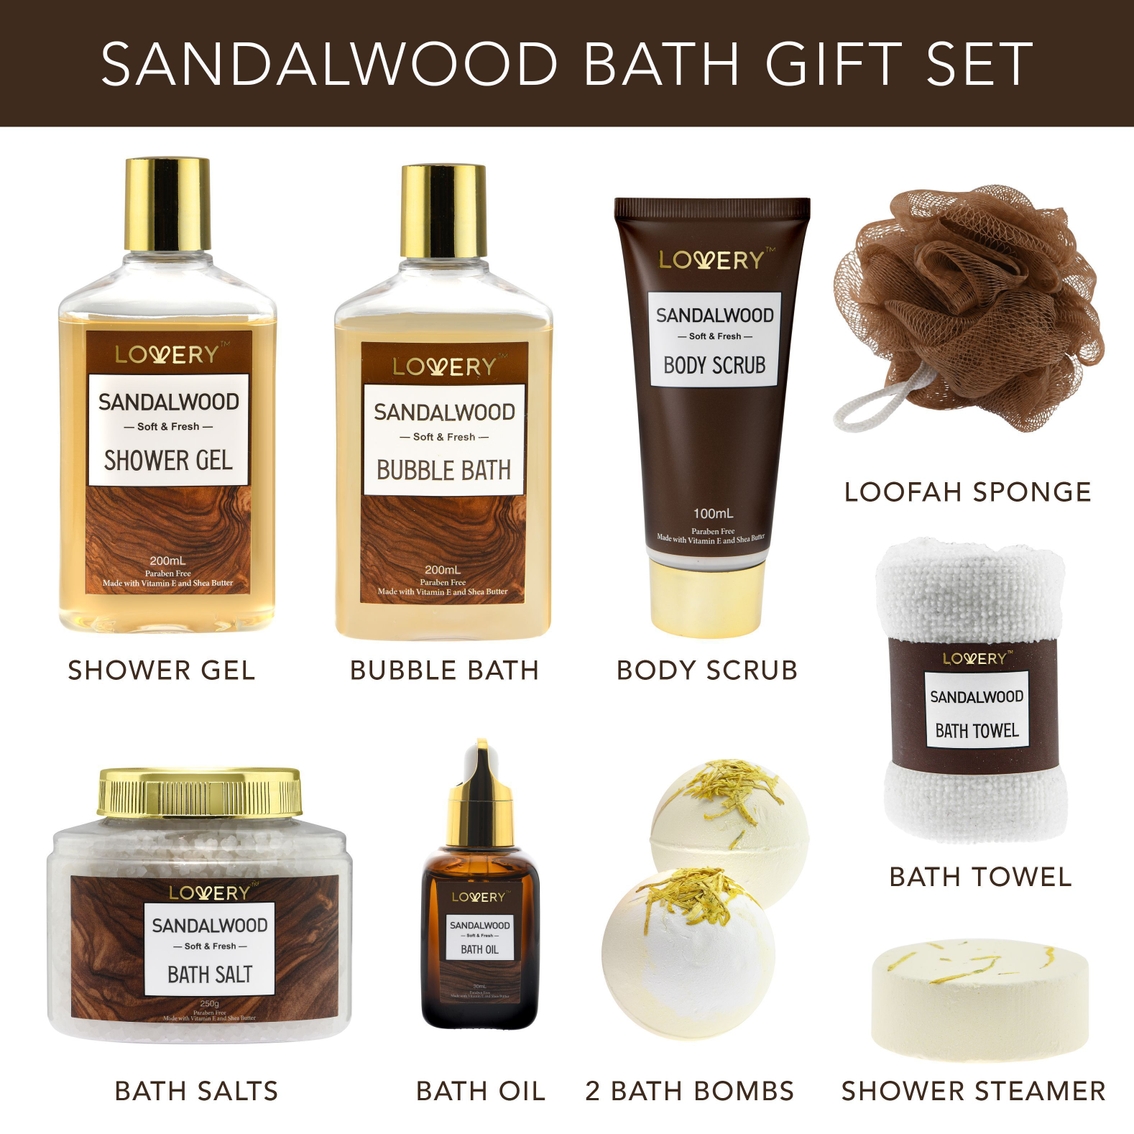 Lovery Luxury Spa Kit for Men - Sandalwood Bath Set - in Brown Leather Cosmetic Bag - Image 2 of 5